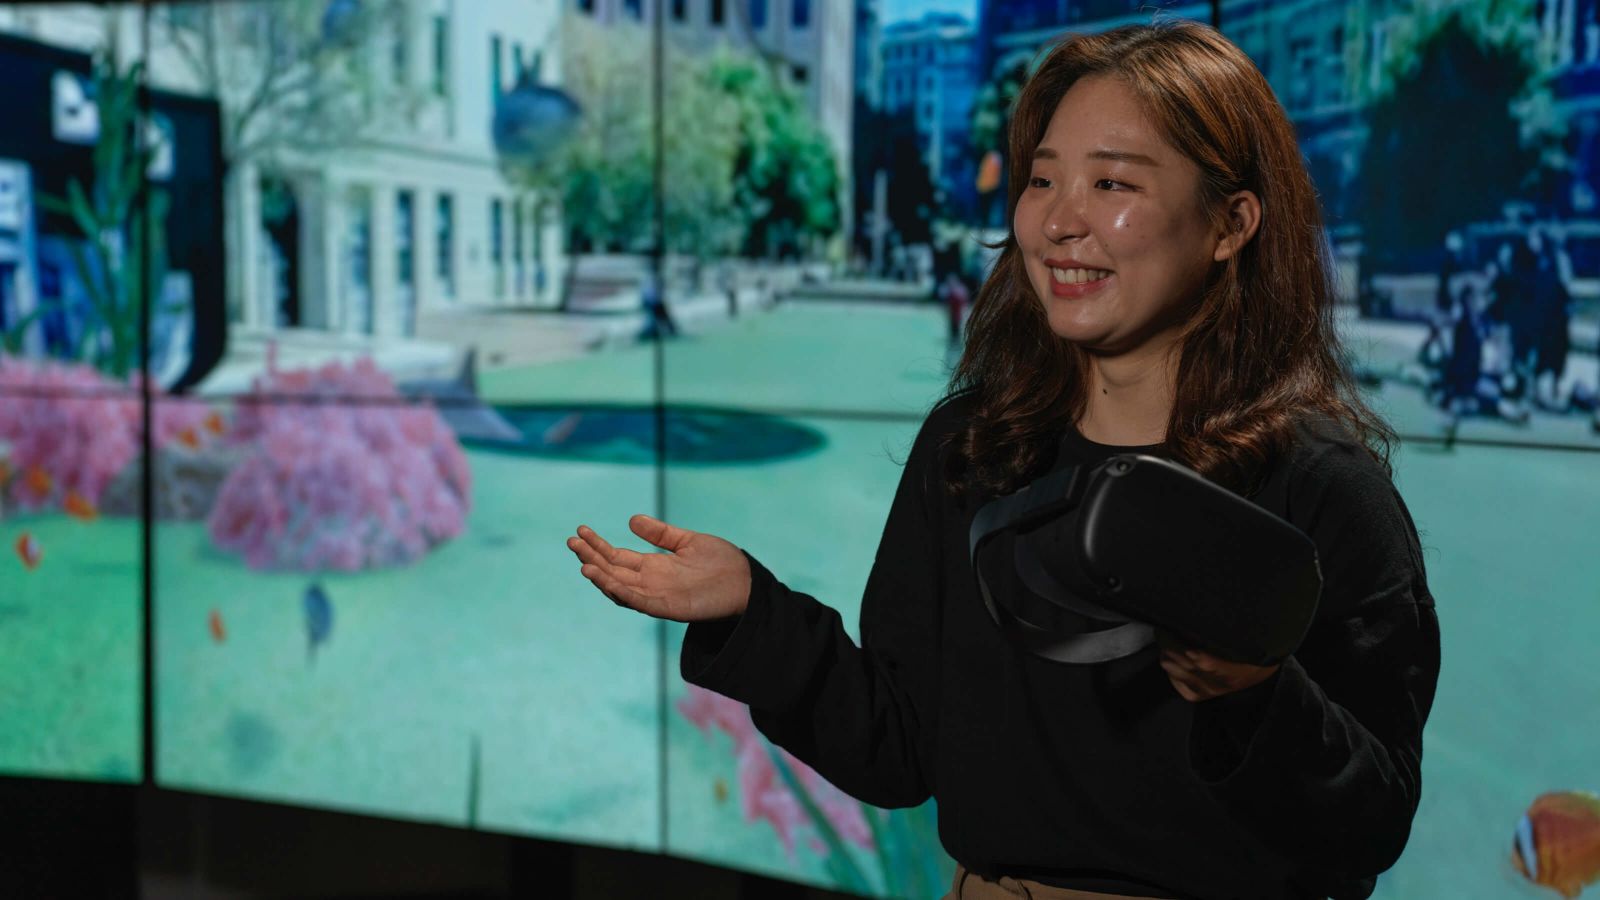 Postgraduate student Betty (Hyejin) Kim is creating computer graphics at the University’s state-of-the-art Computational Media Innovation Centre.